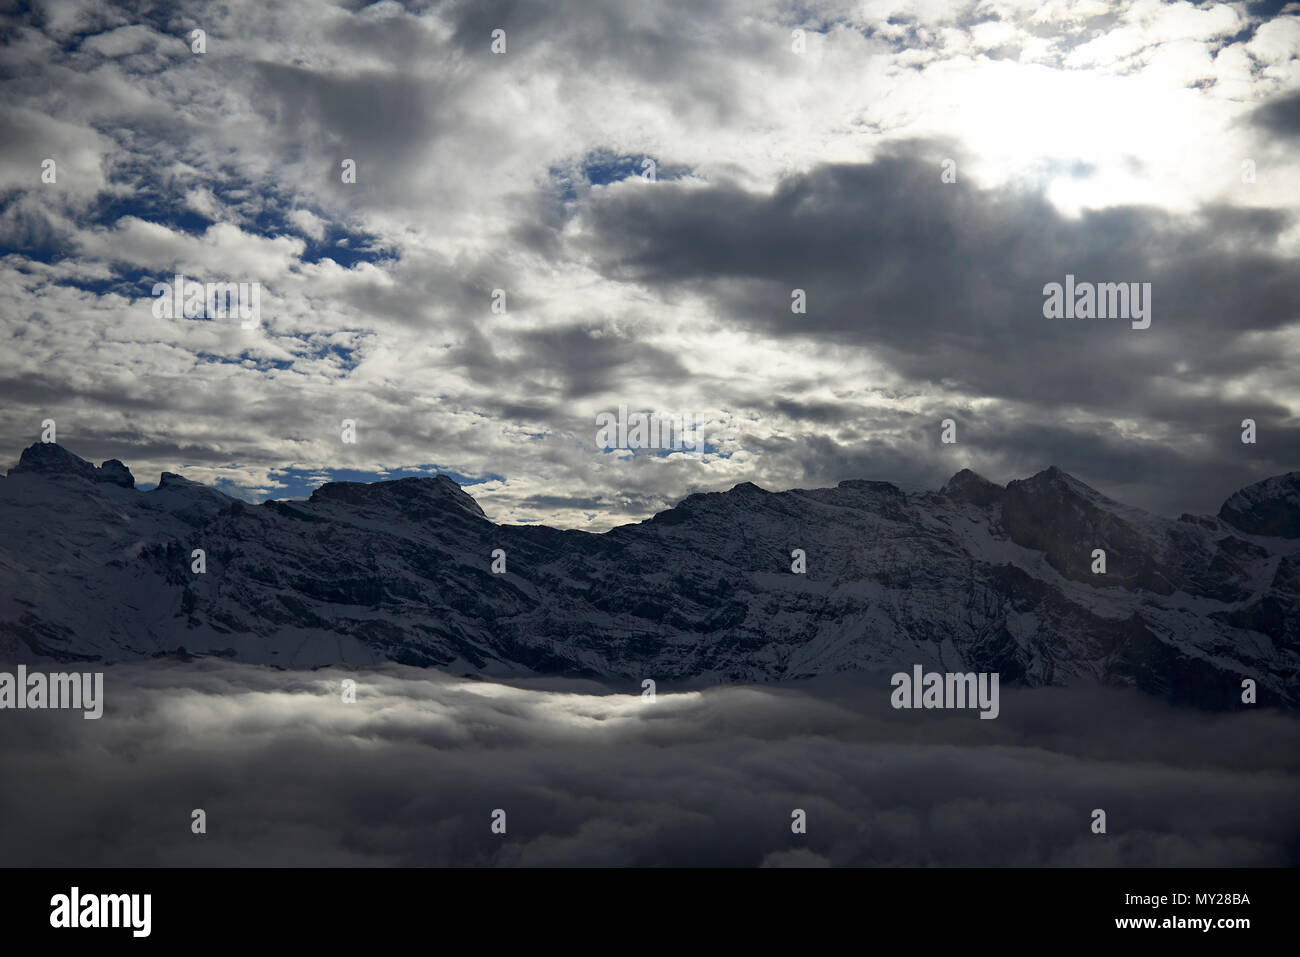 Stunning landscape showing the peaks of the high mountains in the Swiss Alps with the first signs of snow on the mountain tops. Stock Photo